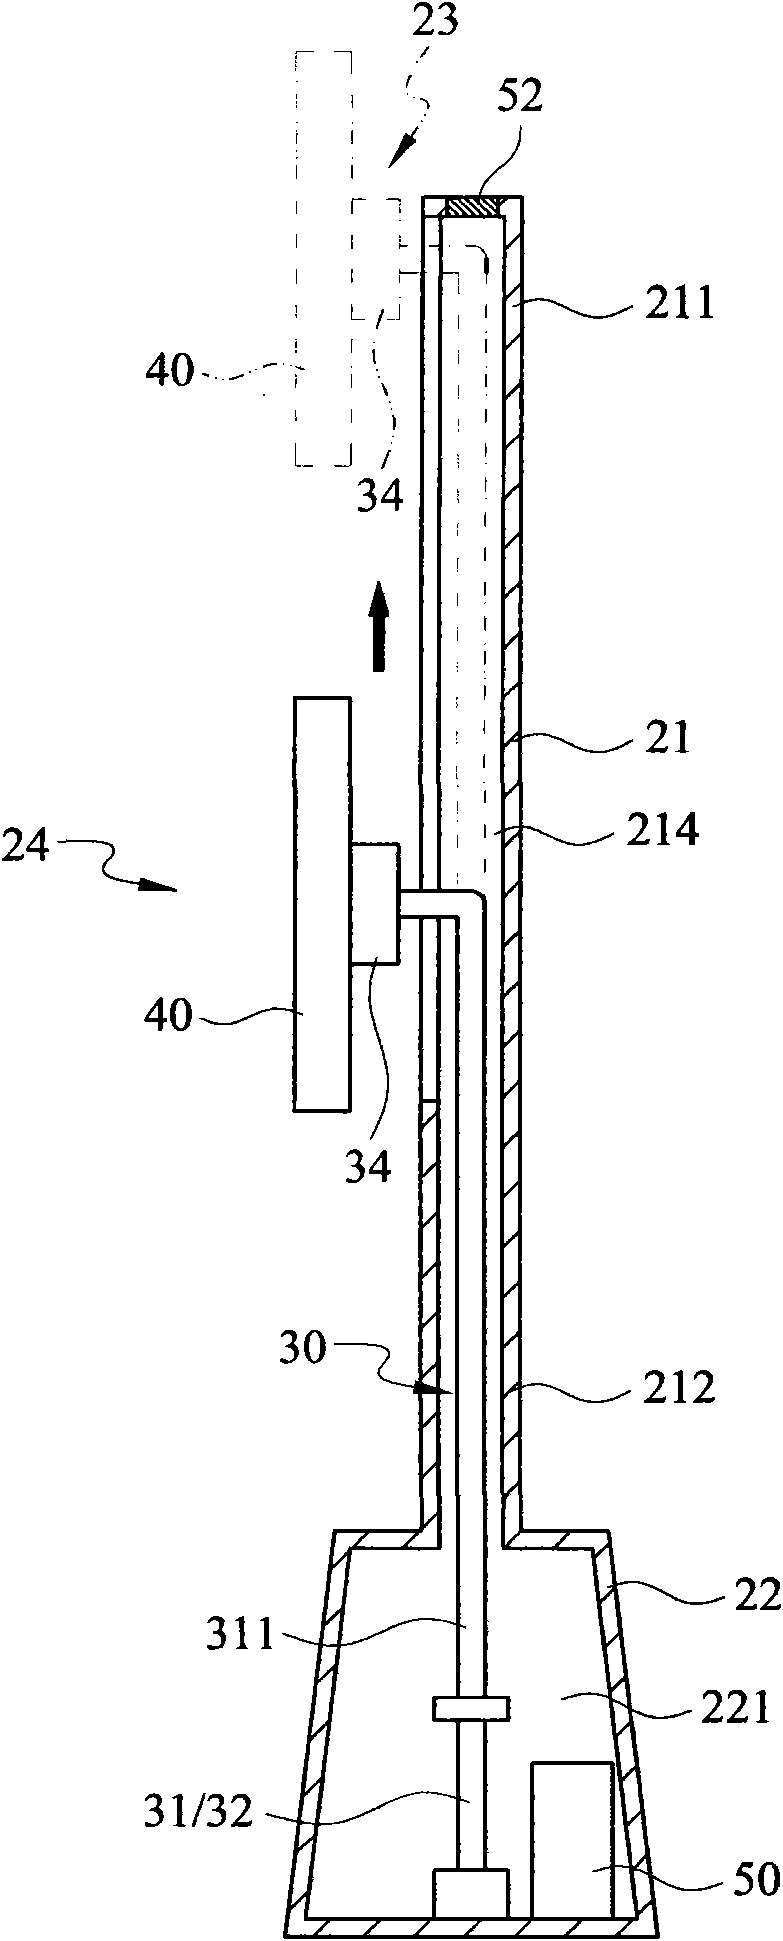 Lamp structure with lighting and displaying functions